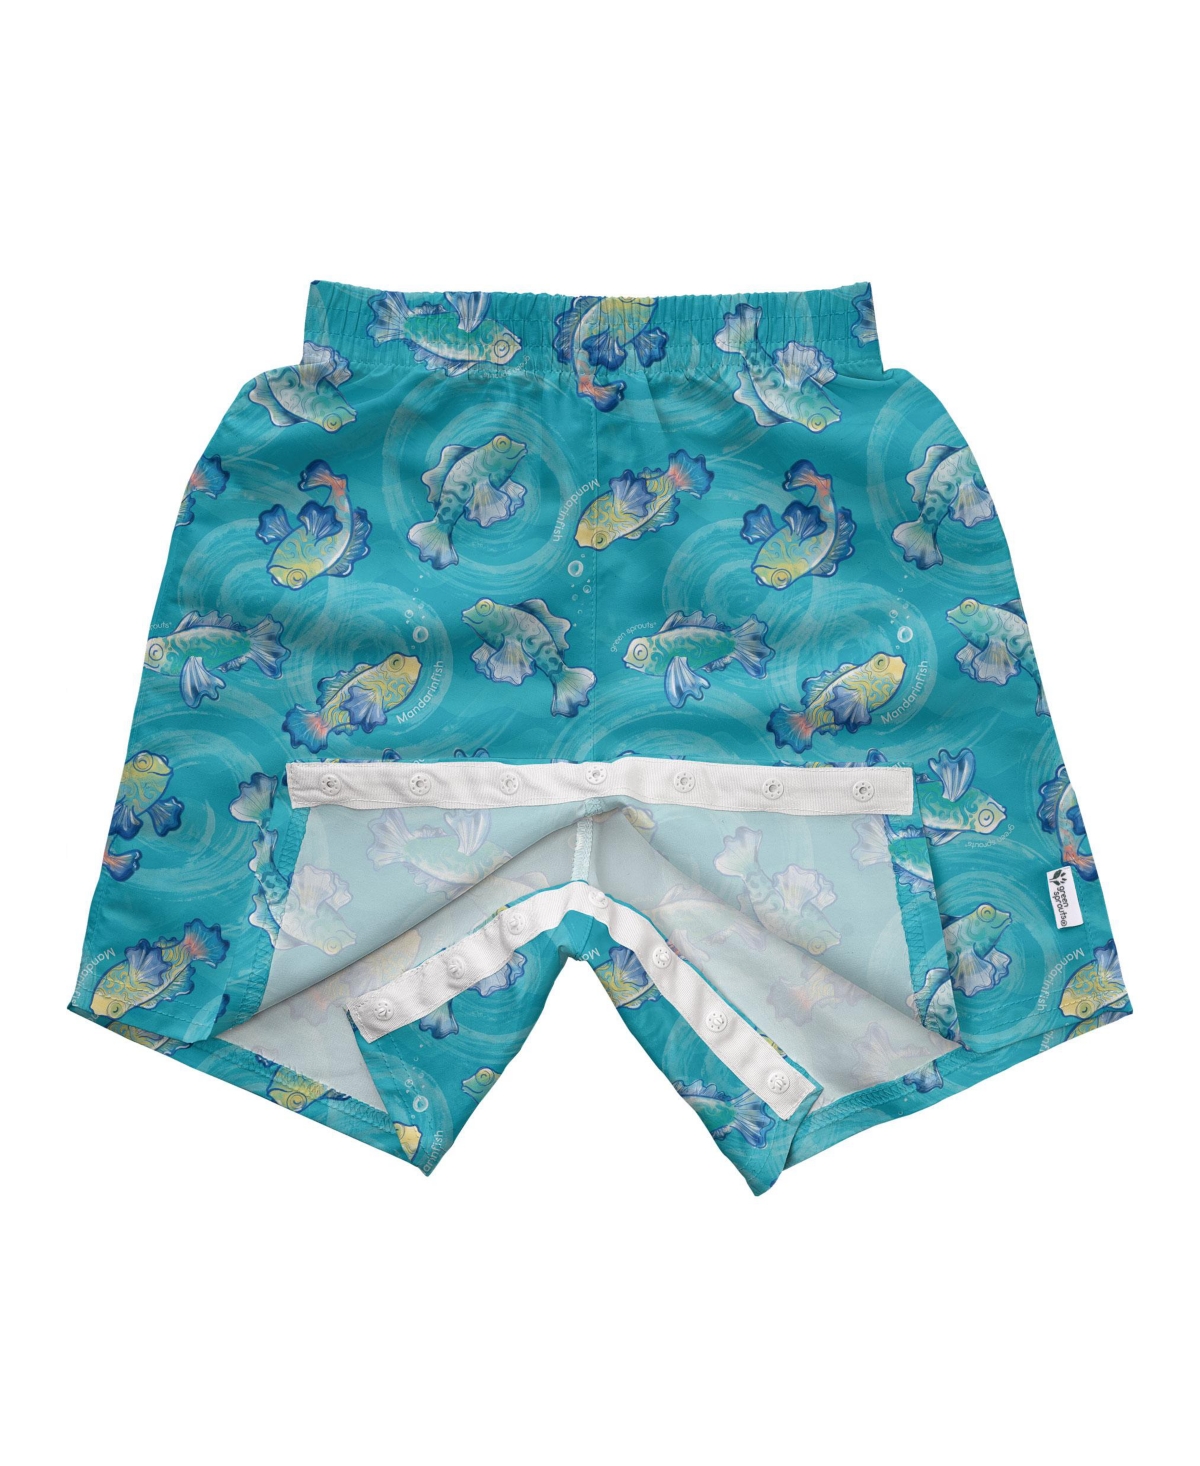 GREEN SPROUTS BABY BOYS LIGHTWEIGHT EASY CHANGE SWIM TRUNKS